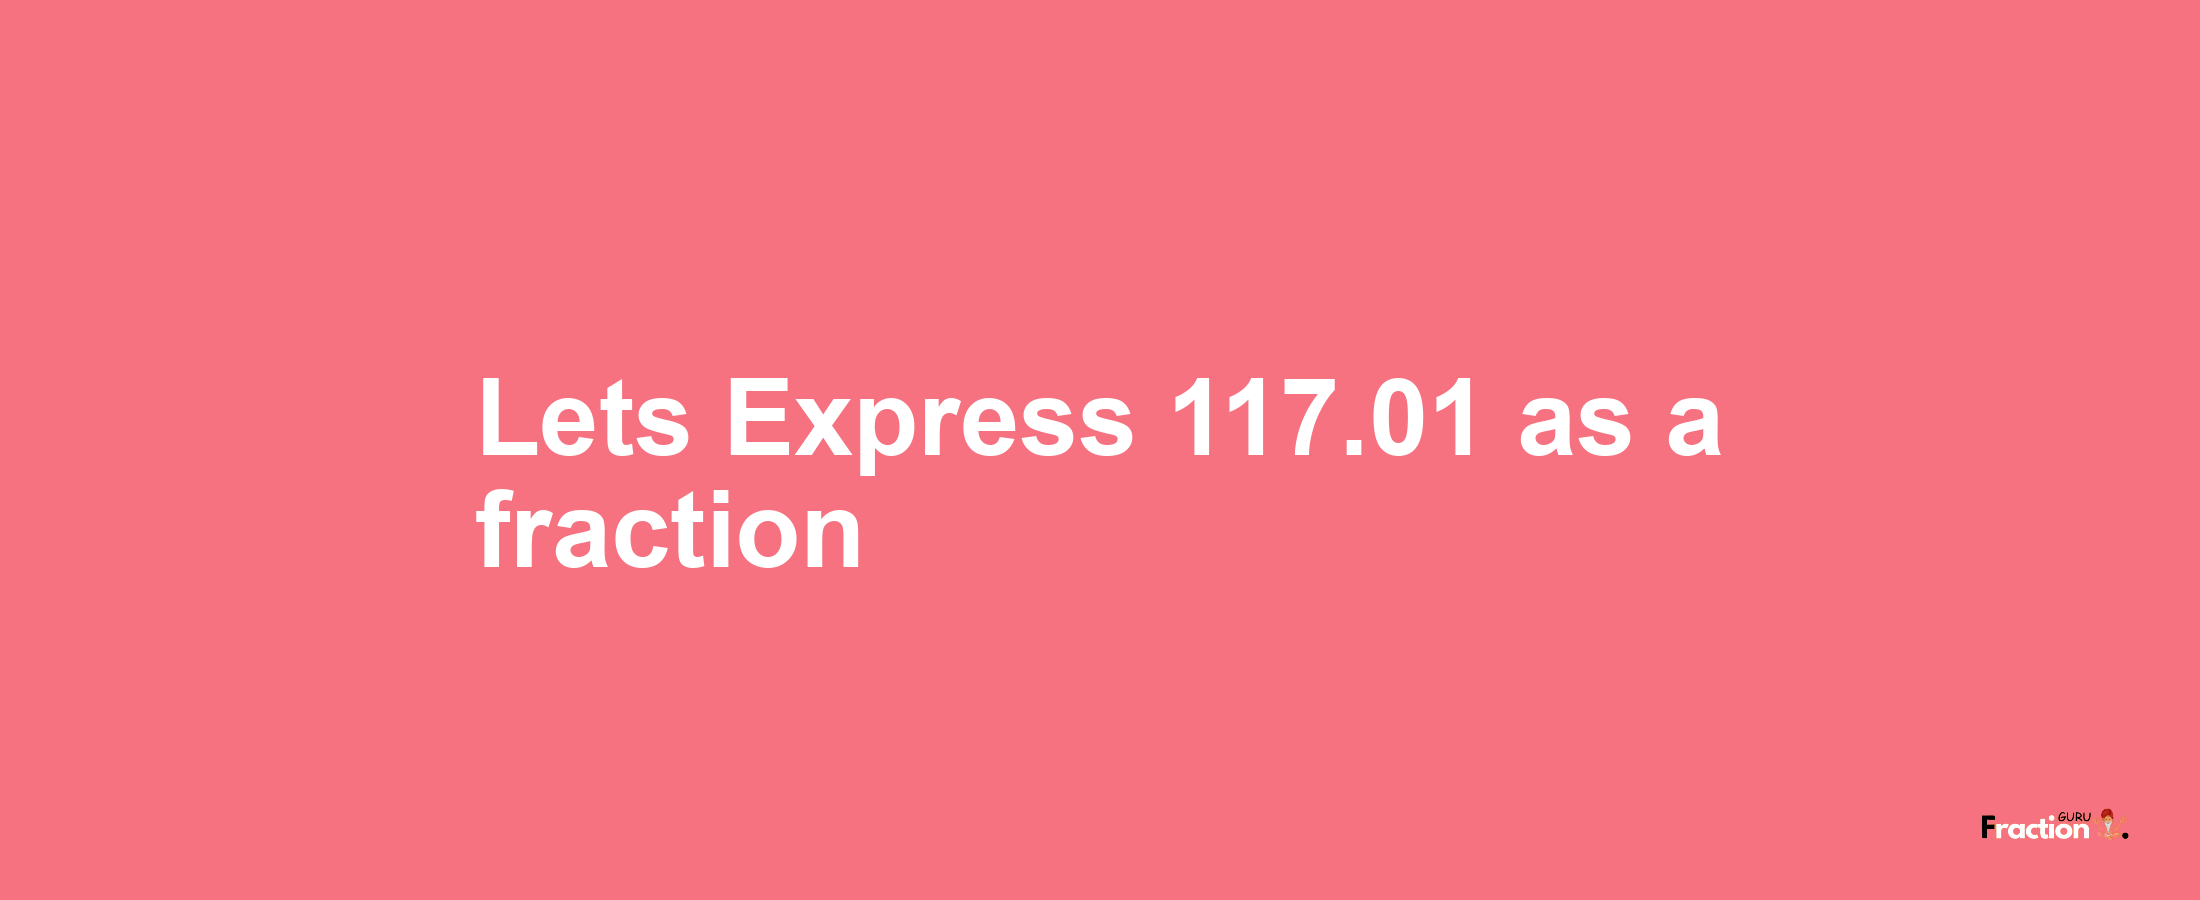 Lets Express 117.01 as afraction